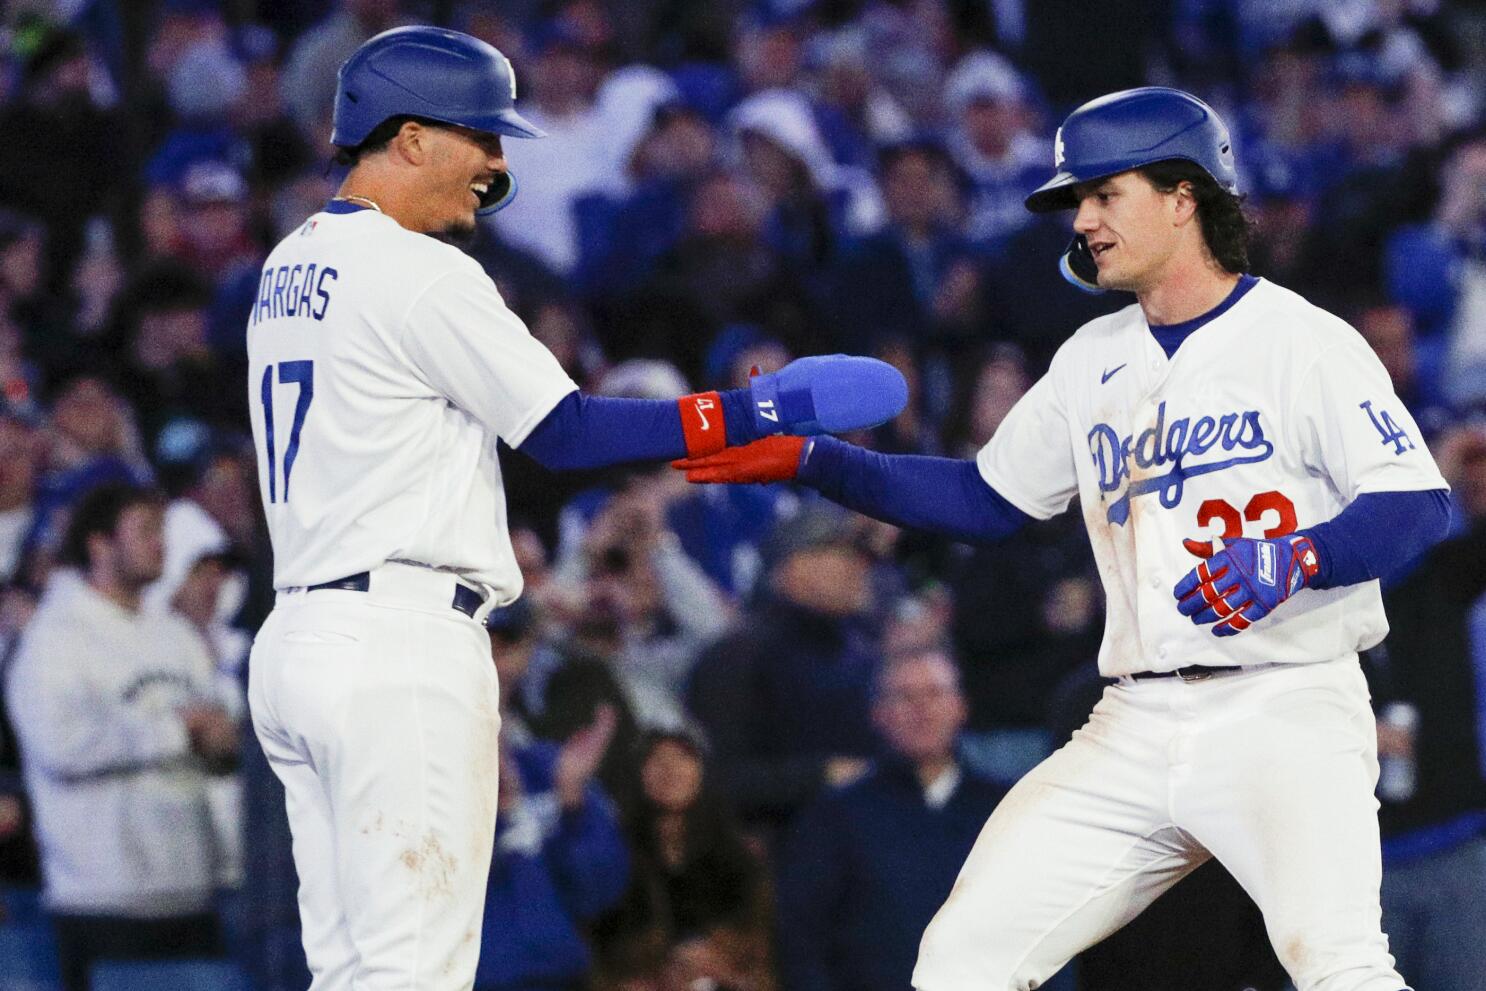 MLB Life on X: The @Dodgers have been wearing white pants with